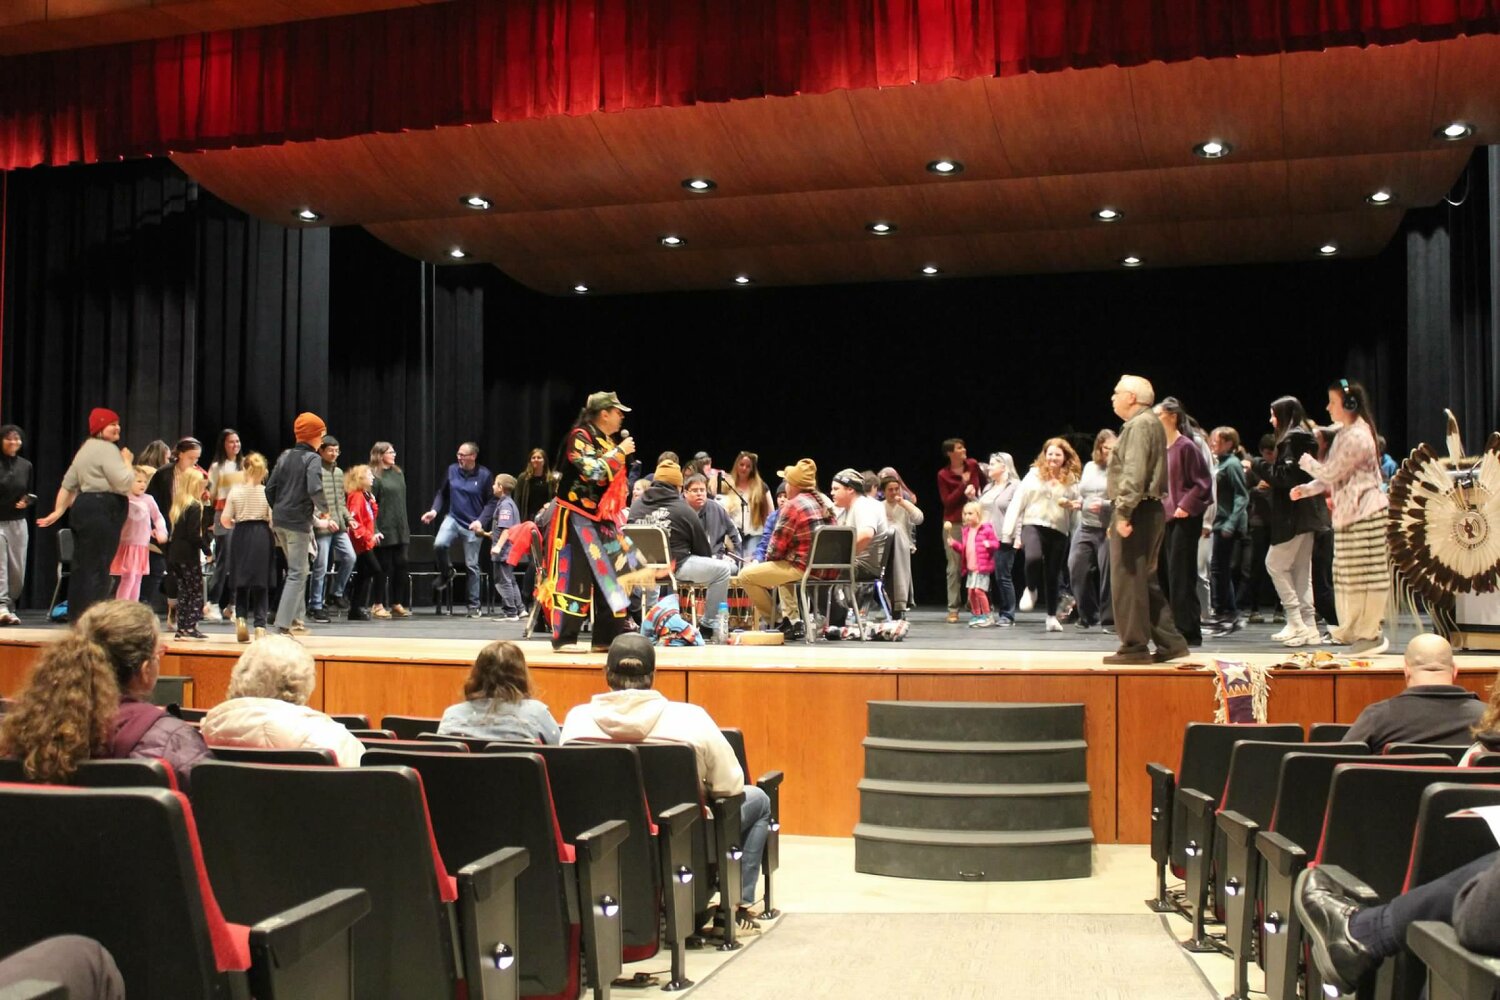 The Ojibwe Drumming and Singing Group Tomahawk Circle performance at Prescott High School Feb. 3 was made possible by grants from the Prescott Foundation, St. Croix Valley Foundation, and the Building an All Inclusive Community Group (BAIC).